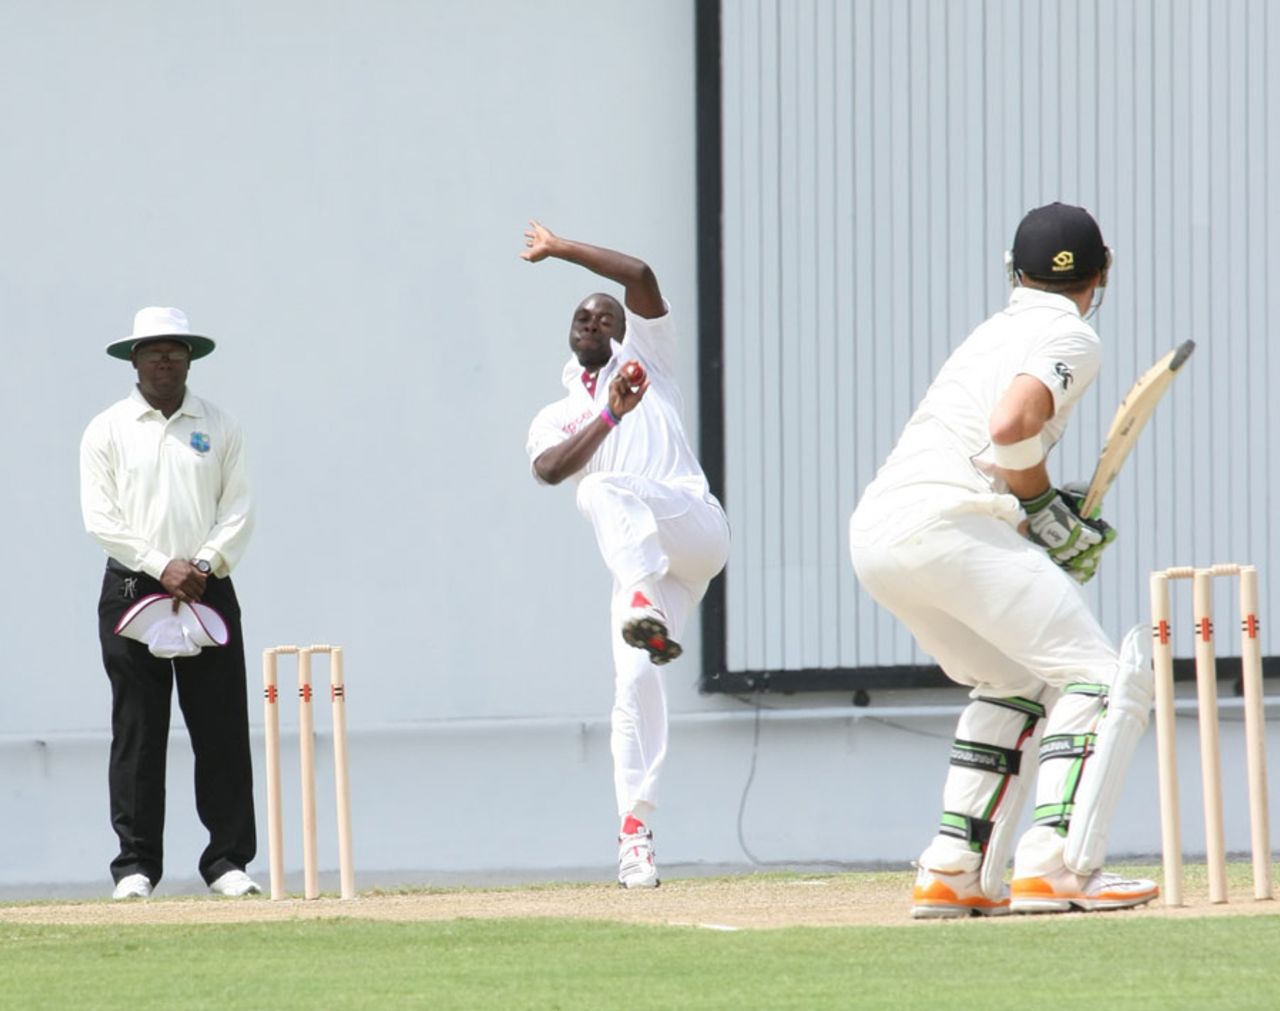 Kemar Roach ended the day with figures of 4 for 28, West Indies Cricket Board President's XI v New Zealanders, Day one, Antigua, July 20, 2012